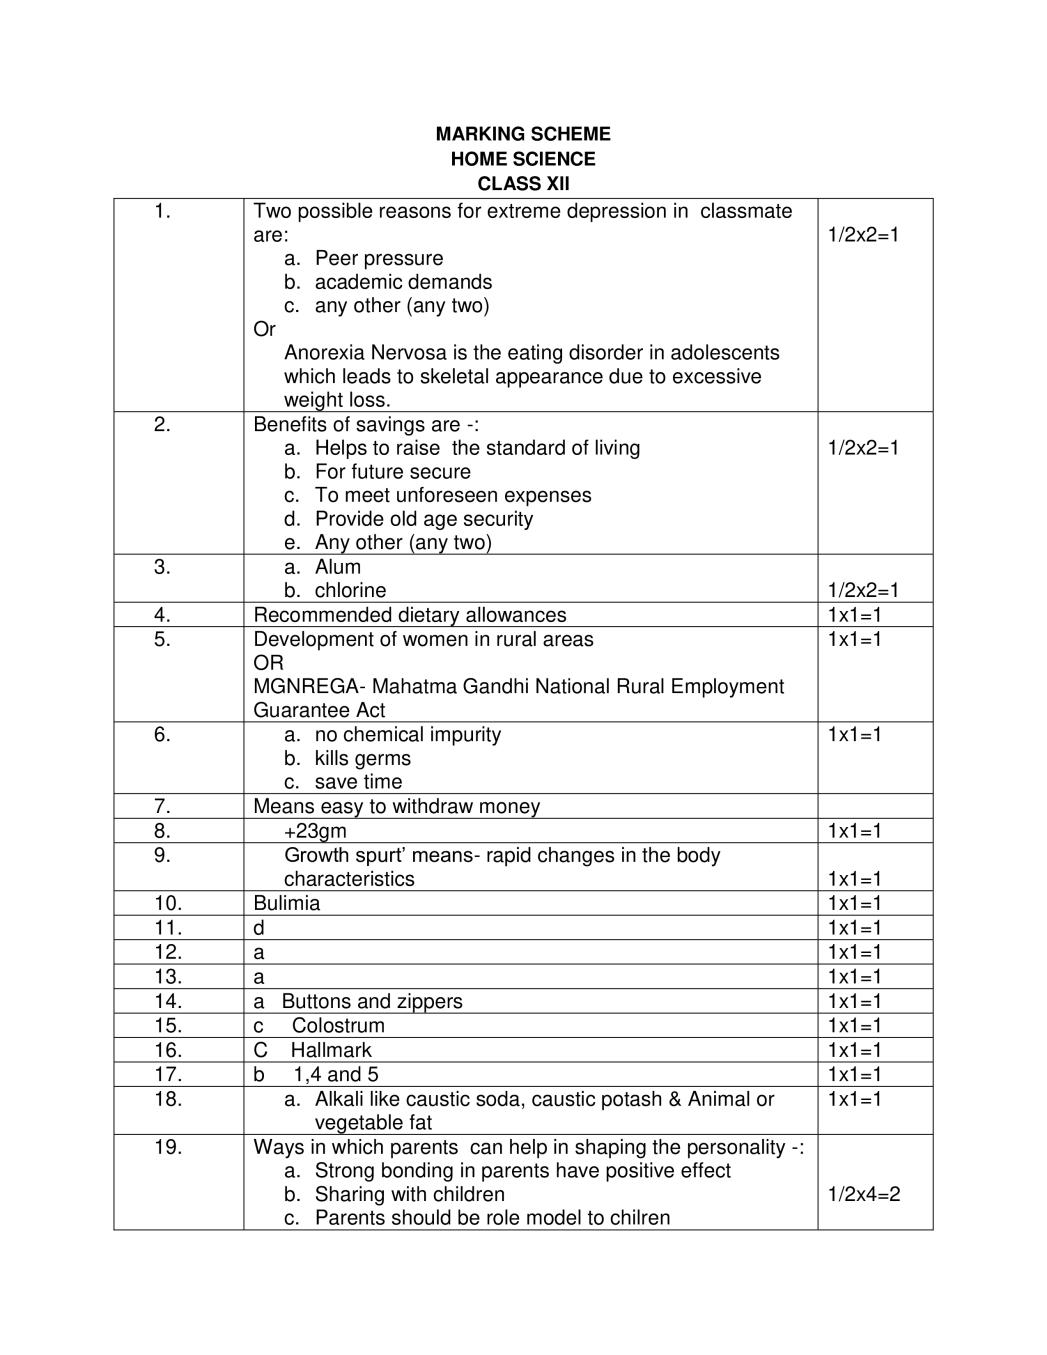 CBSE Class 12 Marking Scheme 2020 for Home Science - Page 1